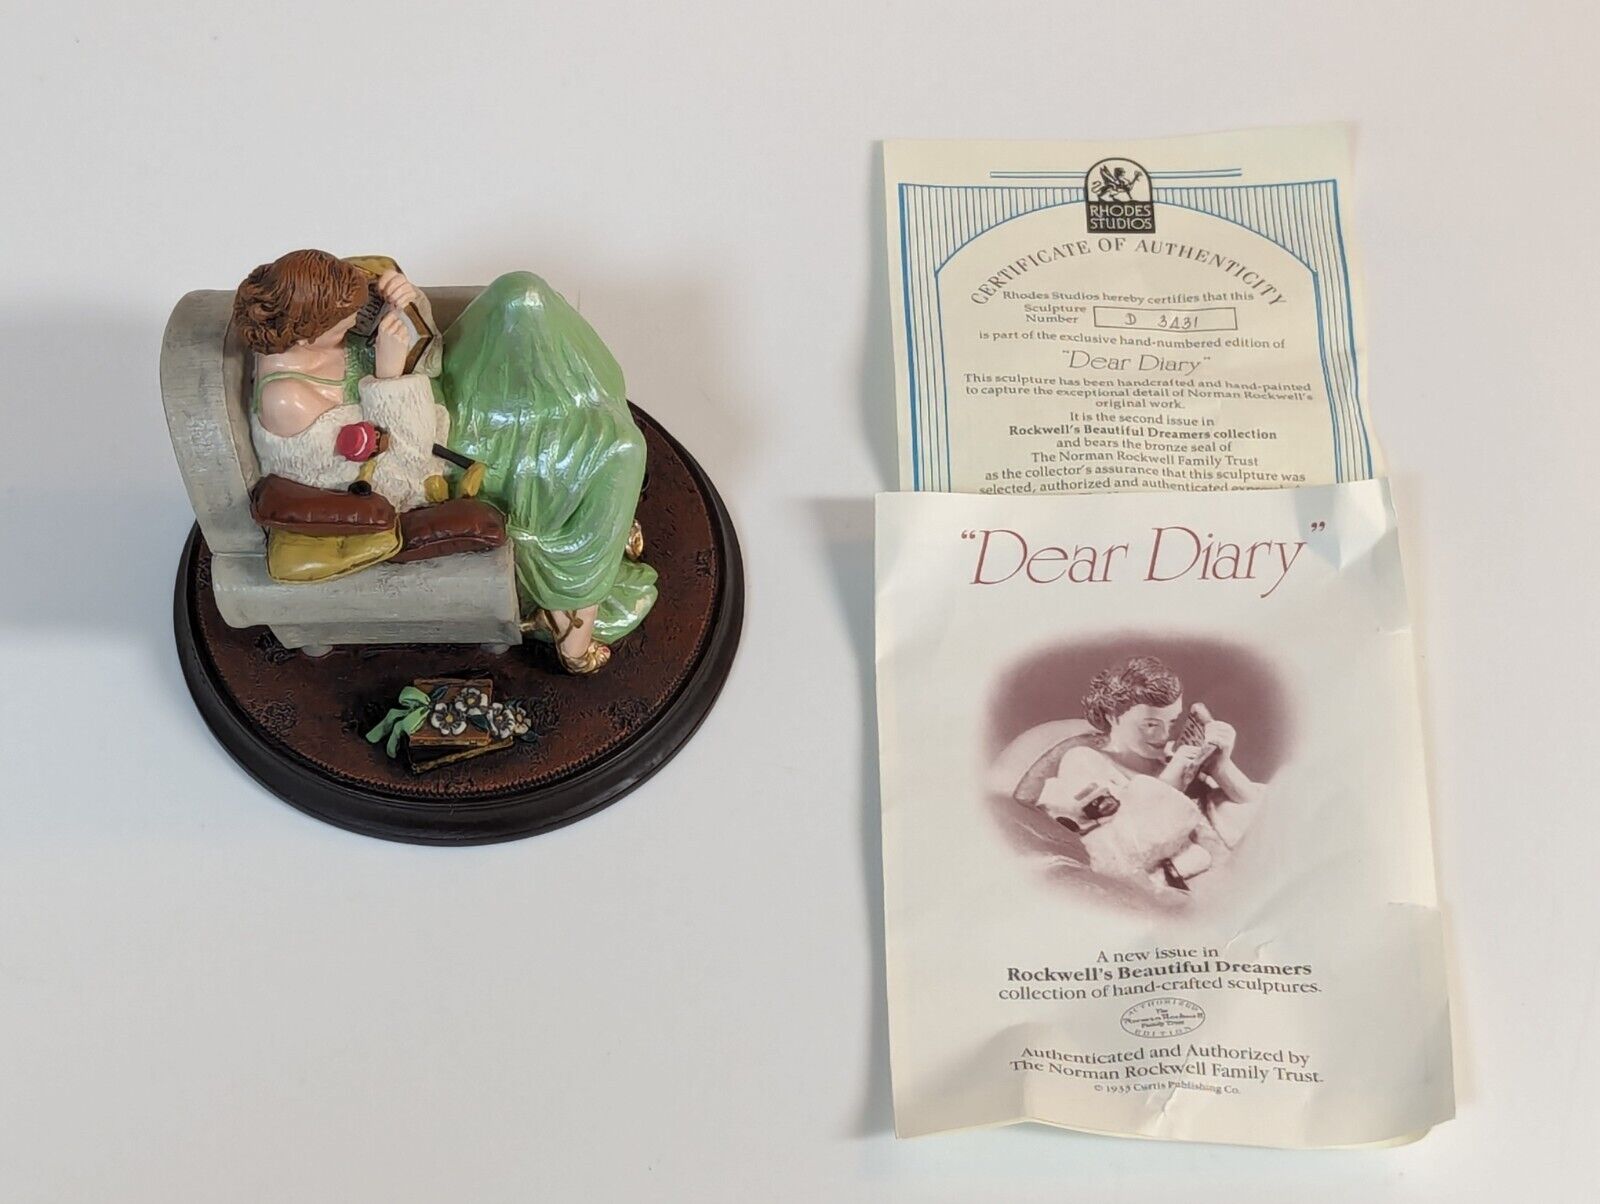 Dear Diary Figurine, Rockwell\'s Beautiful Dreamers, Excellent Condition with Box